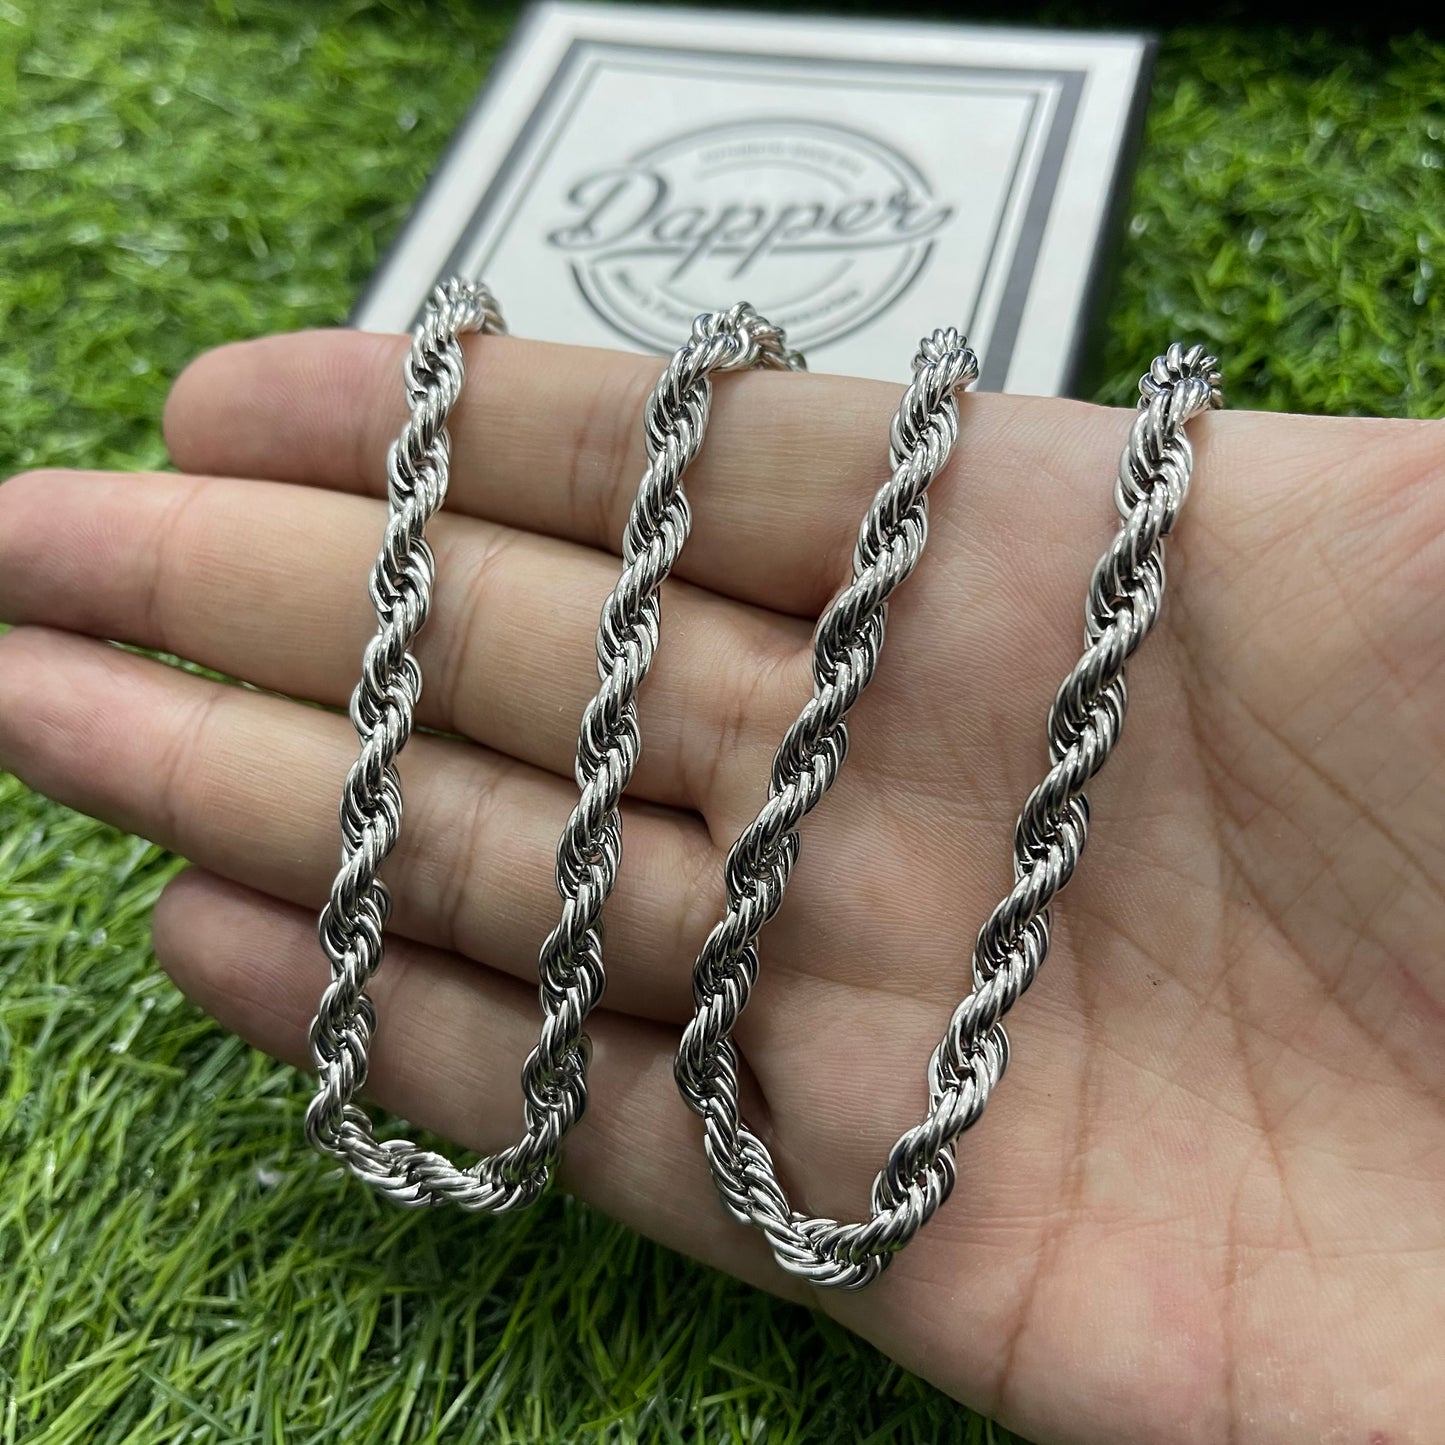 6mm silver stainless steel twisted rope neck chain for men in pakistan